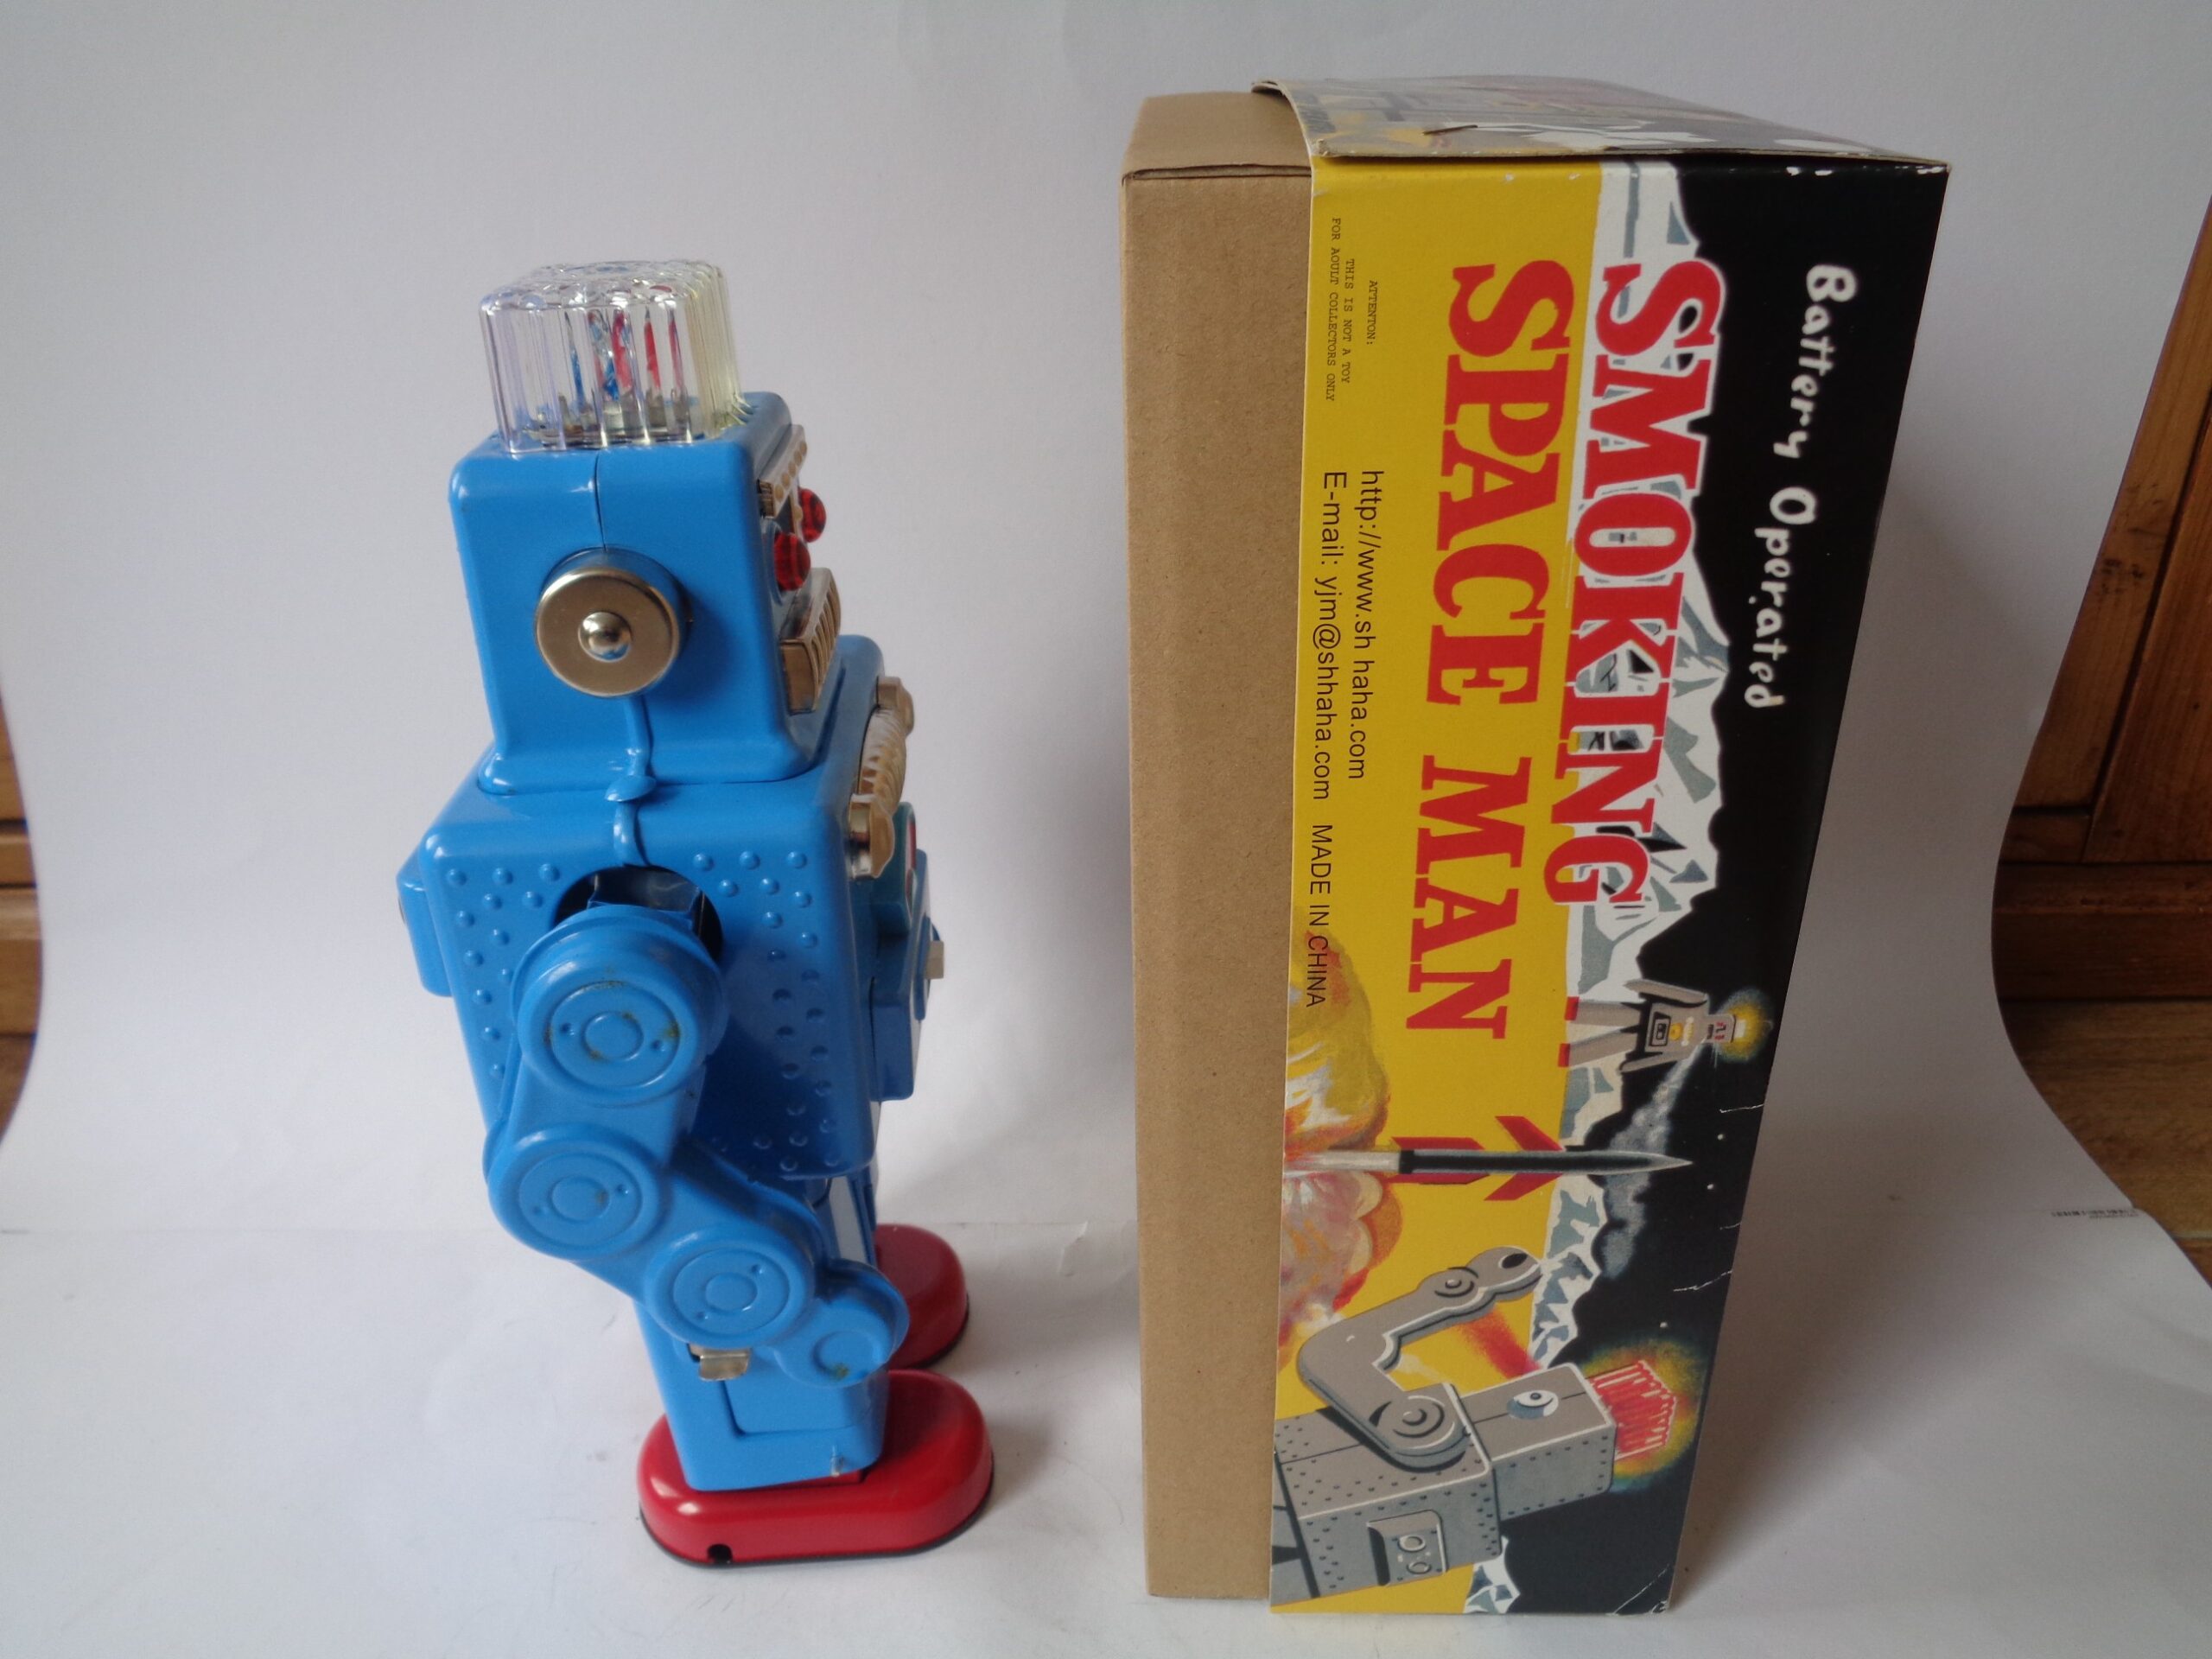 Ha Ha Toy Smoking Spaceman Robot with Box (battery-operated)